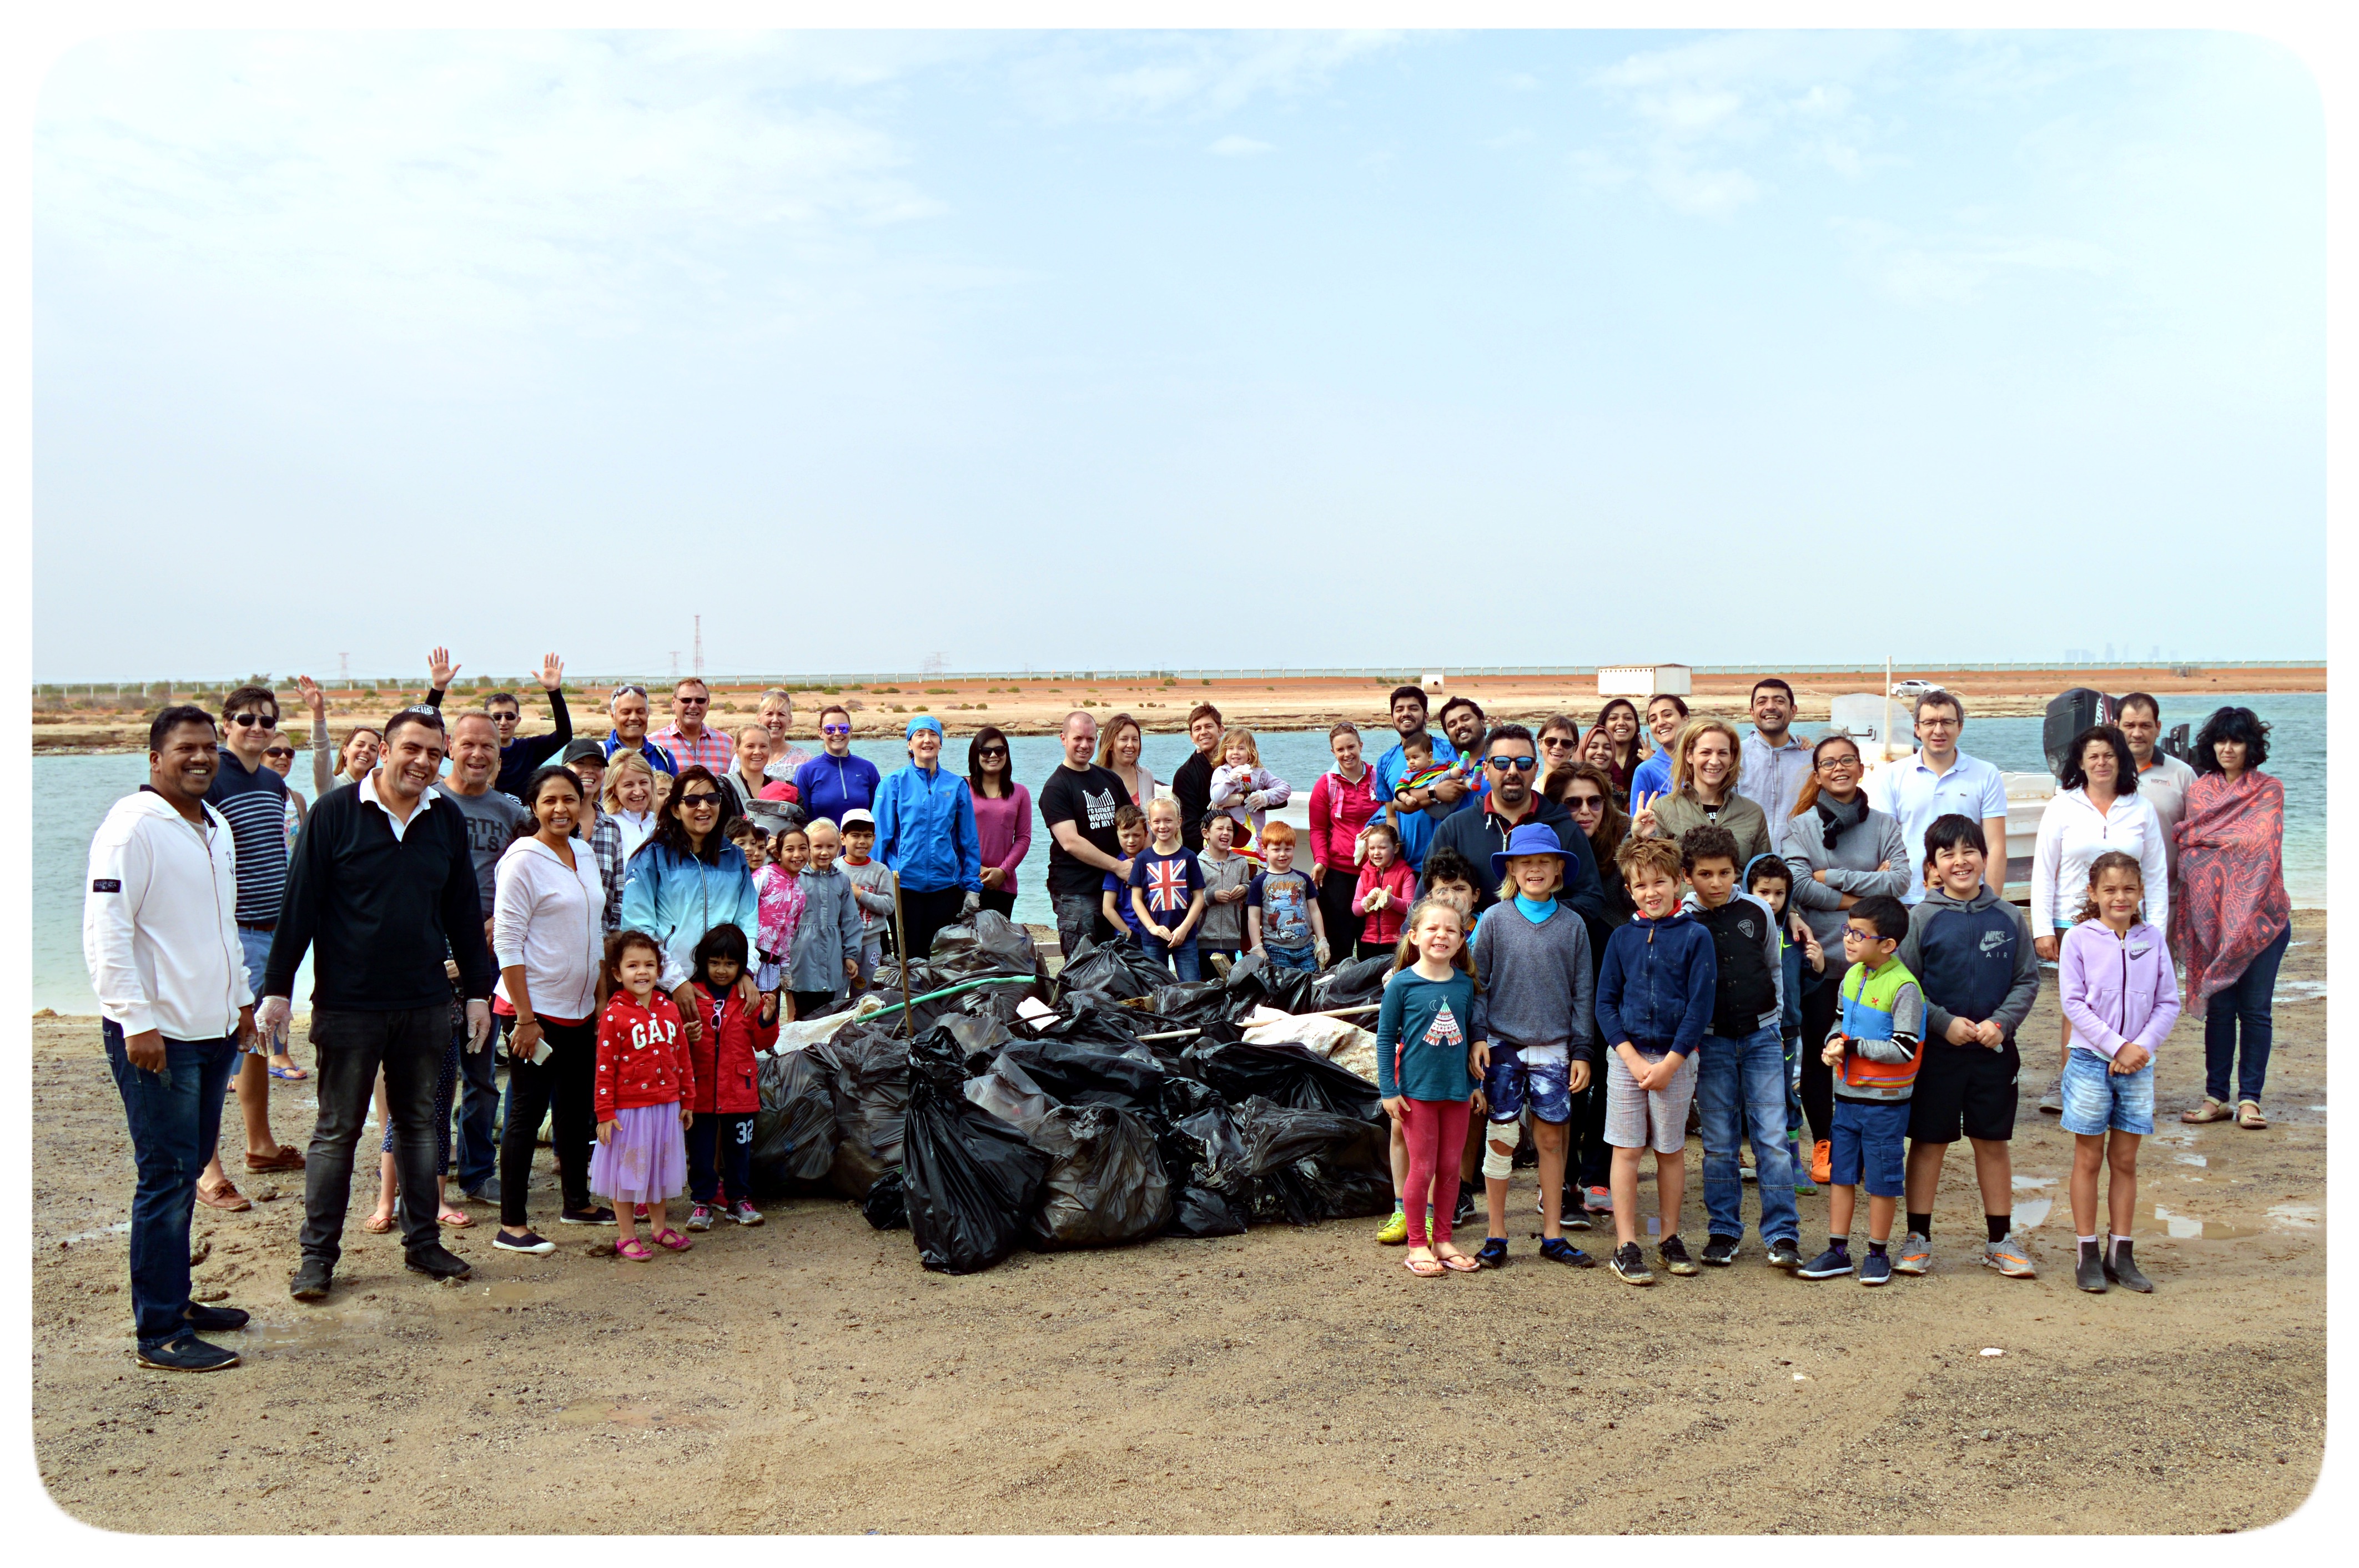 When a school community realise the tide is constantly delivering a large quantity of plastic pollution to their end of the ocean channel they organise not just one, but two successful Beach Clean Ups. This is the step-by-step recount of exactly how organisers coordinated their community to remove the offending waste before it re-entered the ocean current and, by doing so, left behind a clean and considerably safer environment for their children to ‘Play By The Bay’.